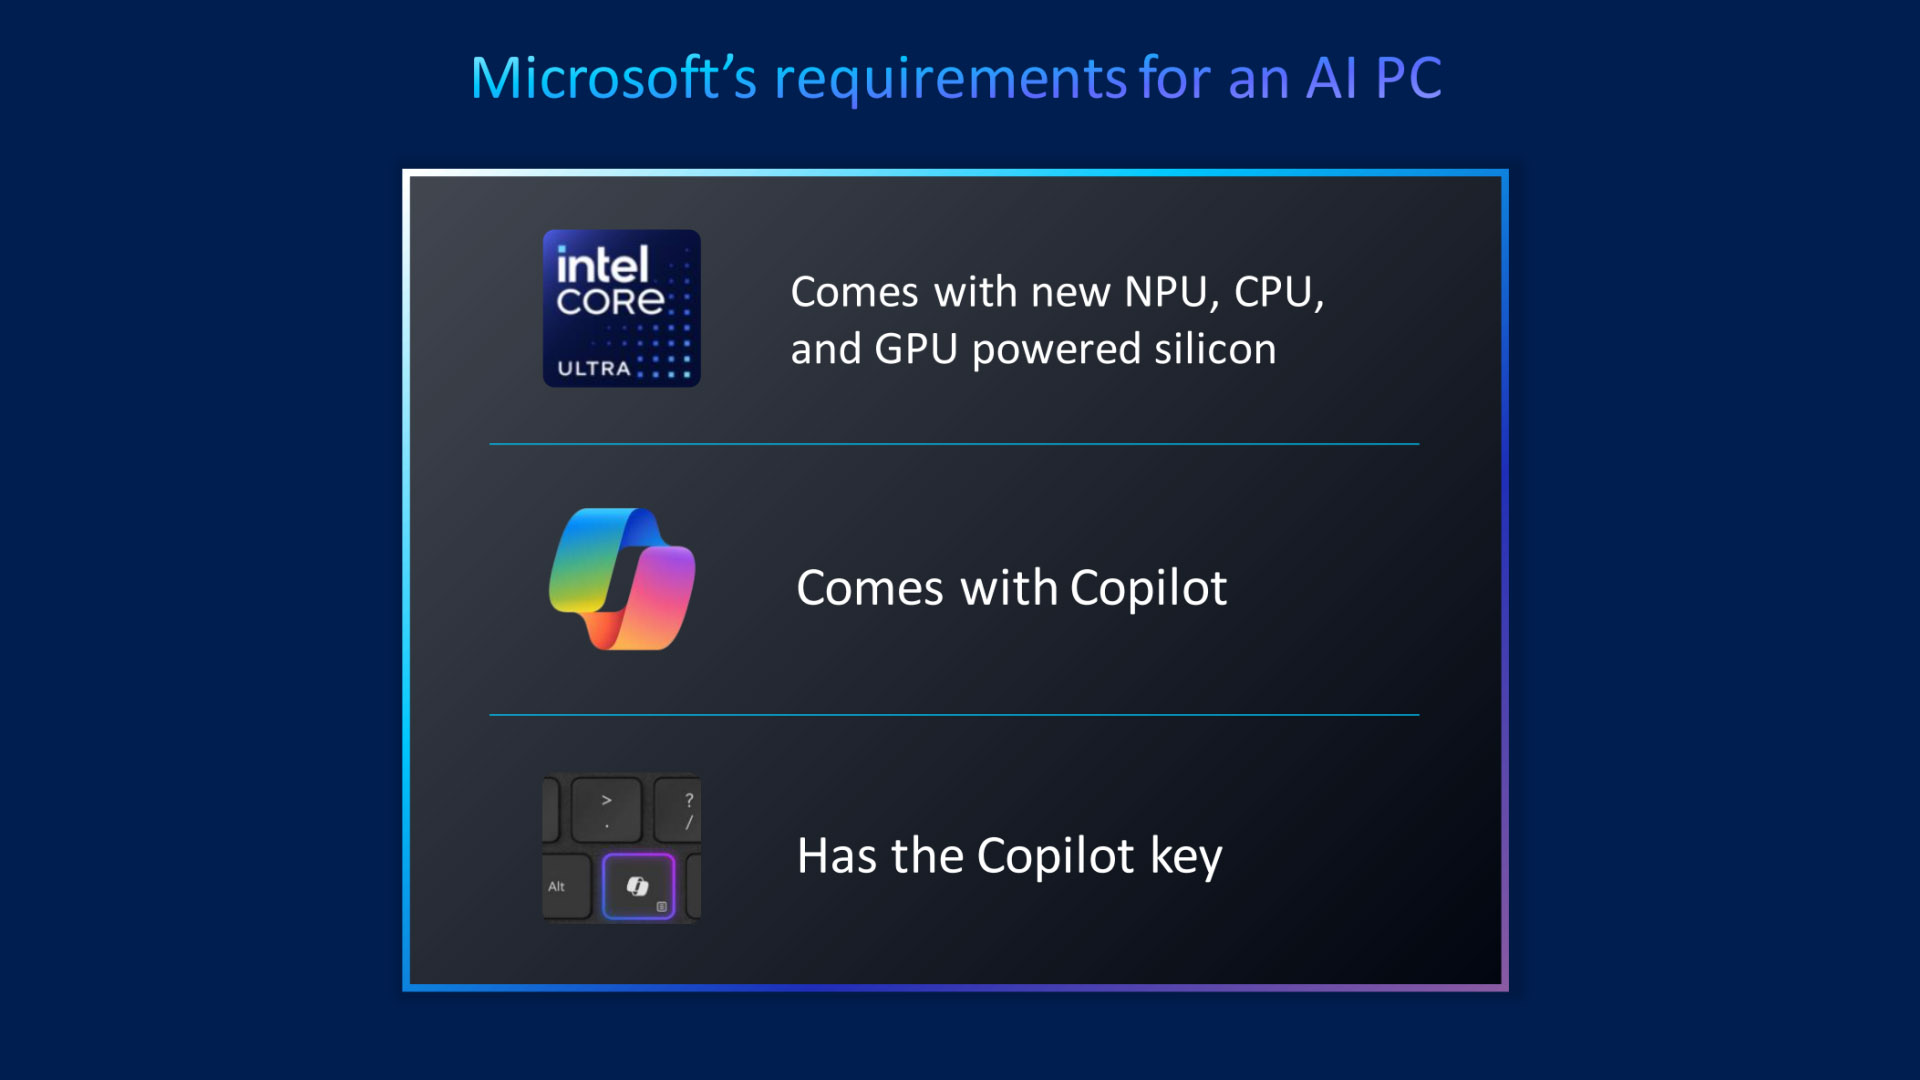 Microsoft intel requirements for an AI PC